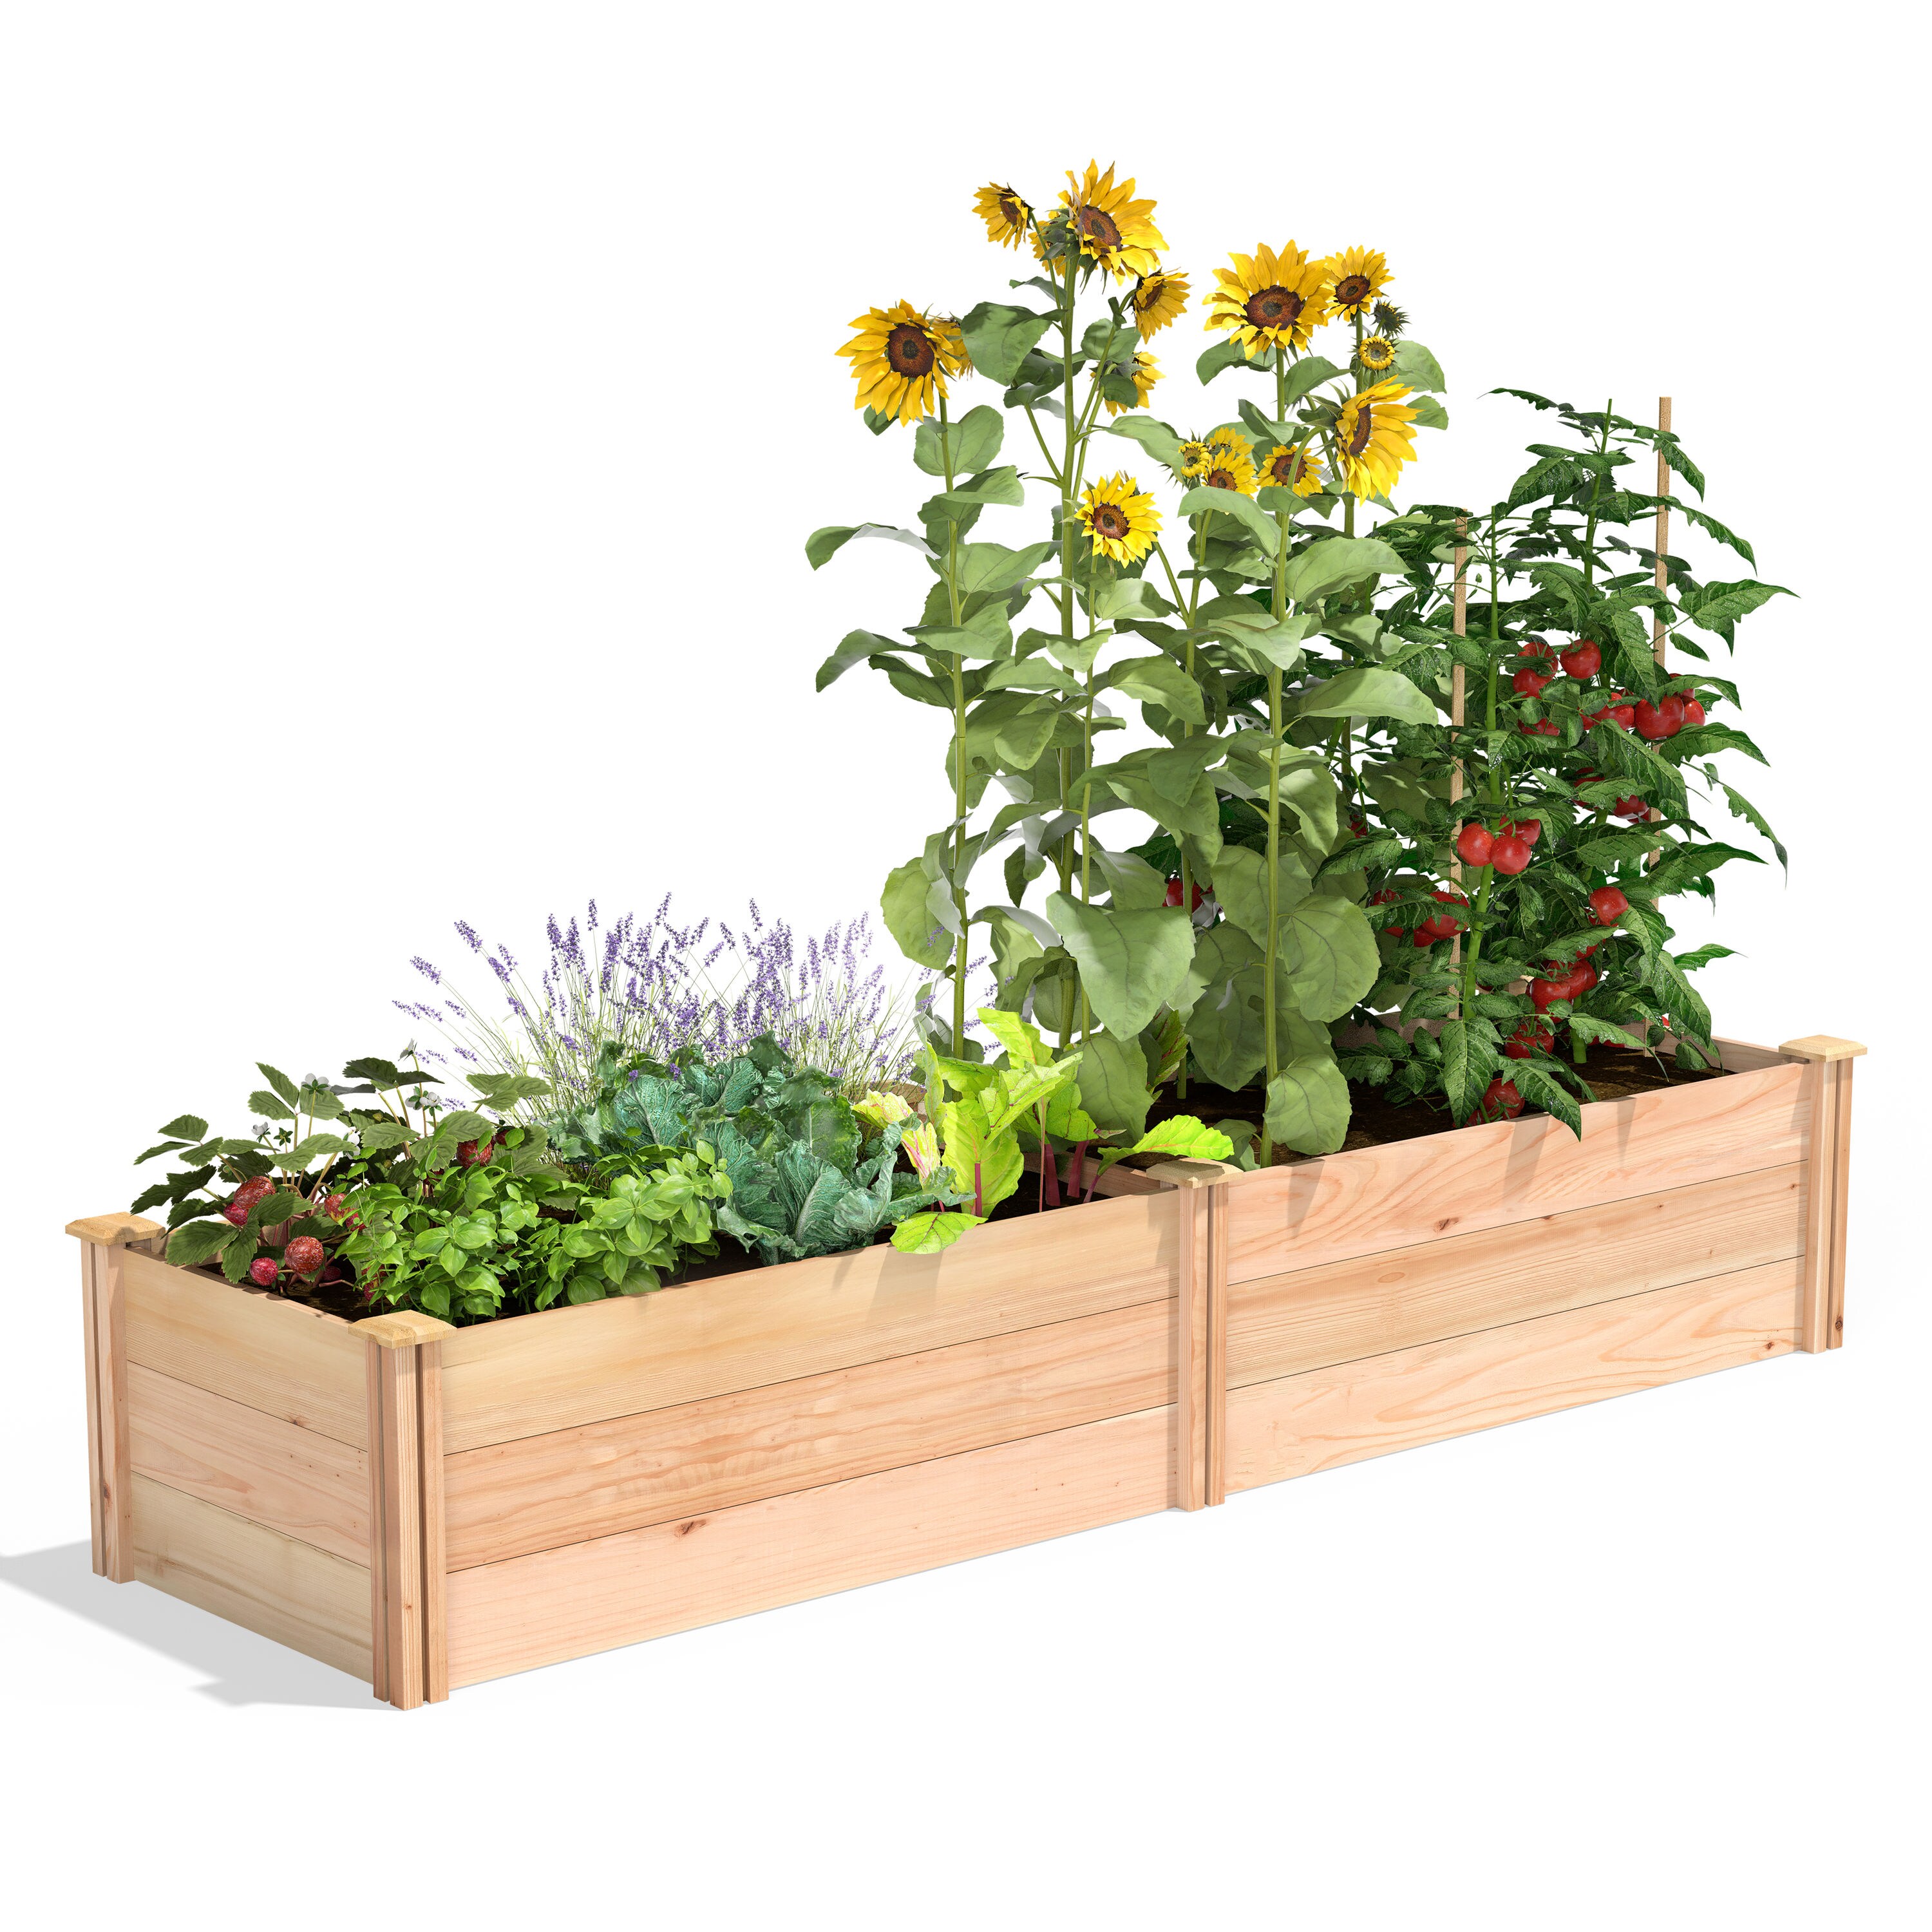 Raised Garden Bed 96 in L x 48 in W x 5.5 in H Rectangle Cedar Natural Finish 